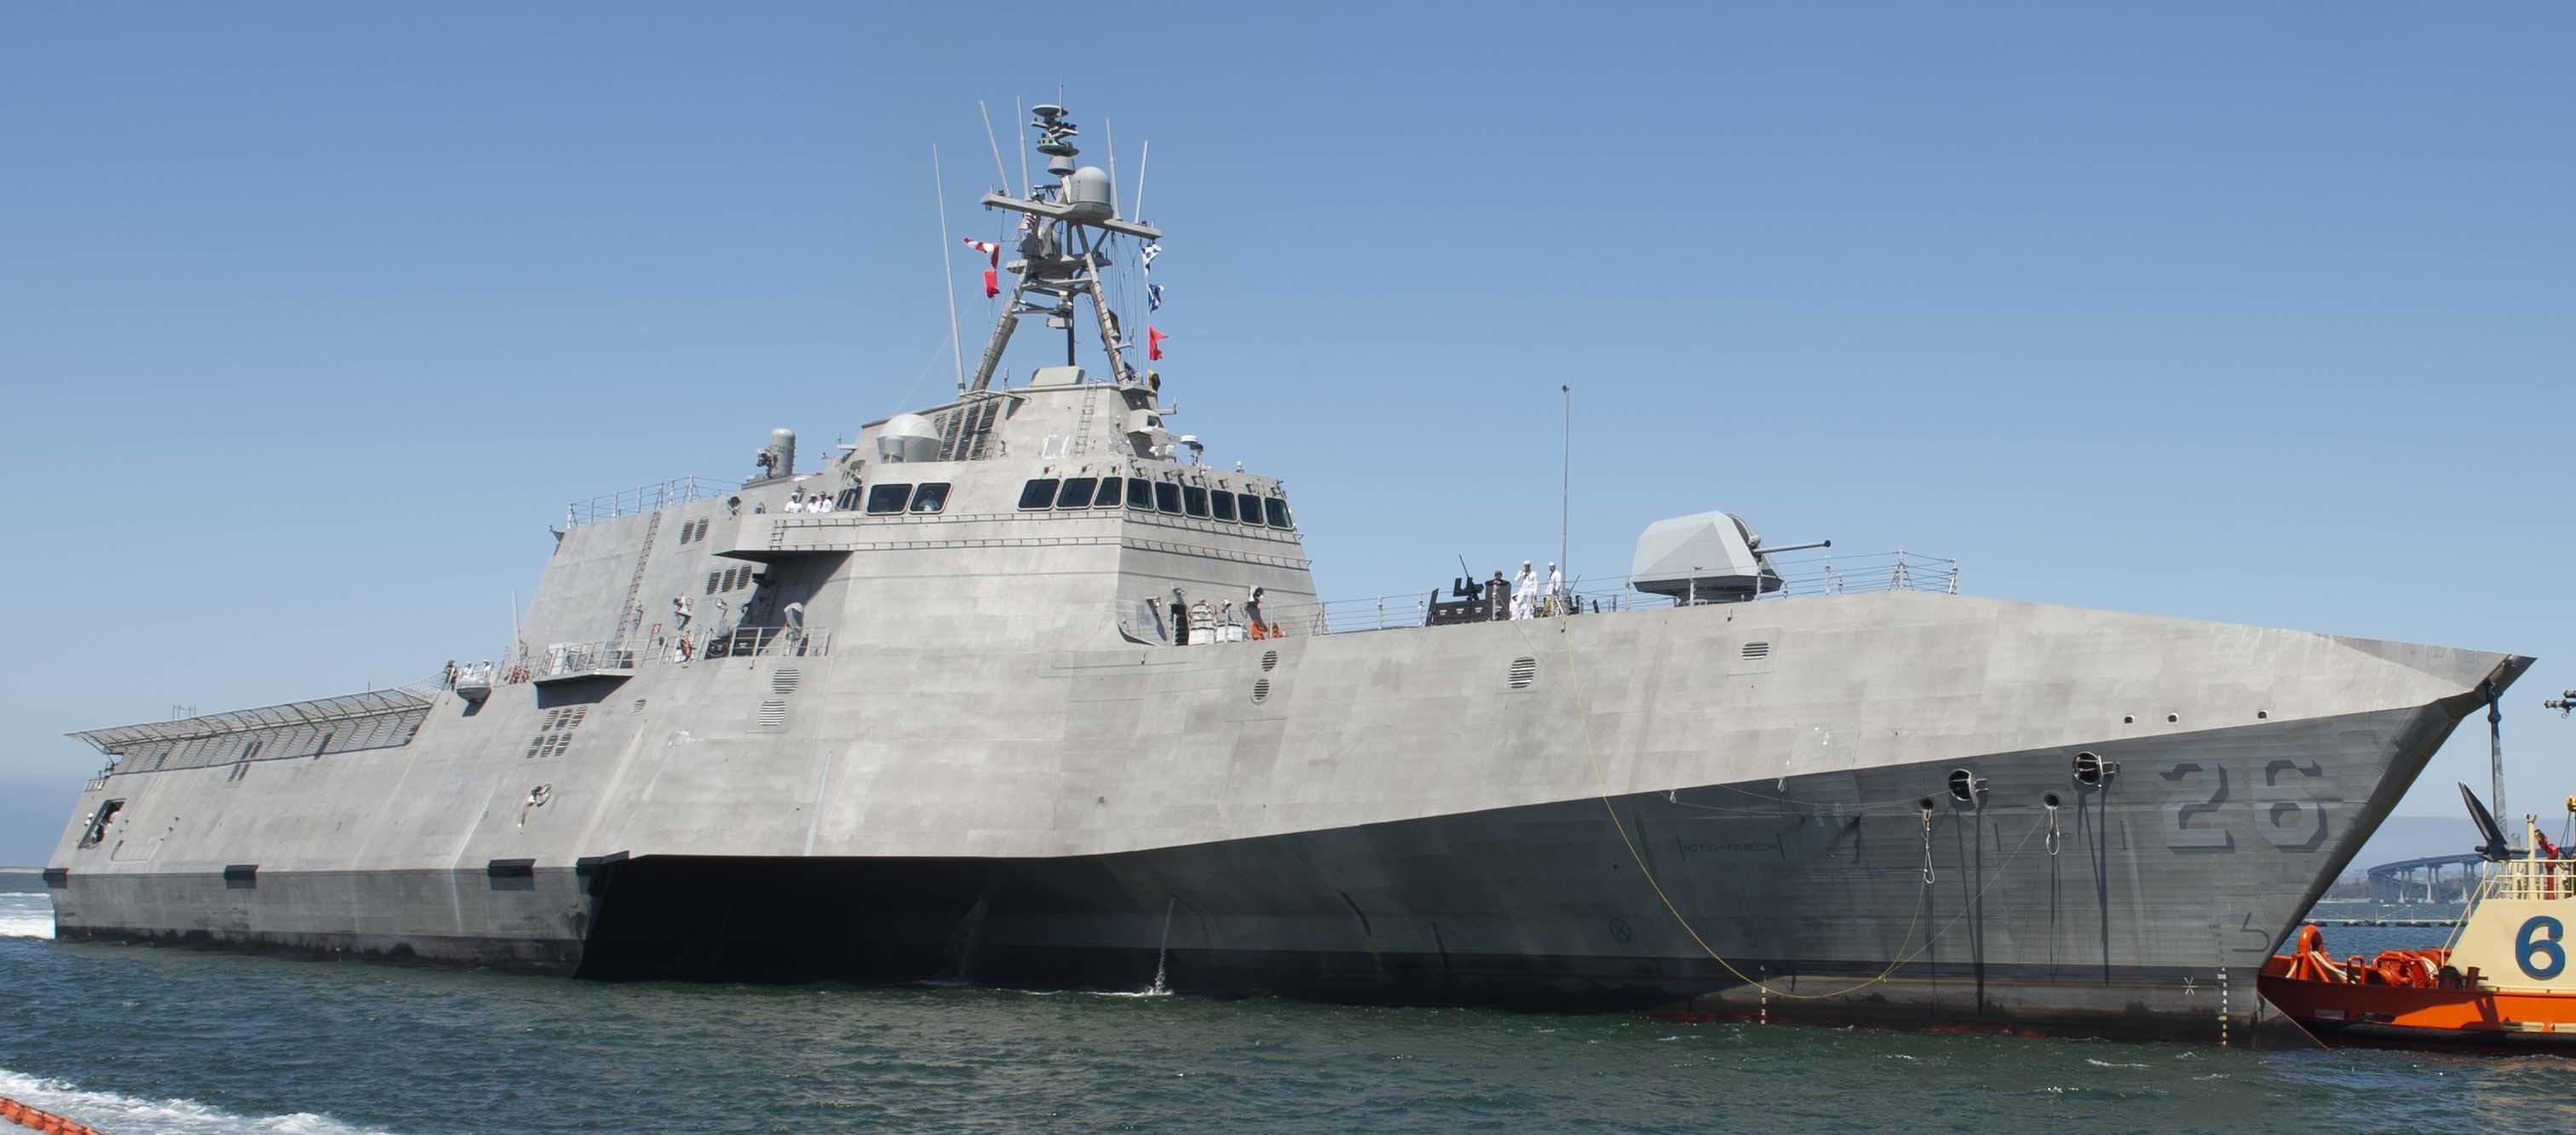 lcs-26 uss mobile independence class littoral combat ship us navy san diego california 14